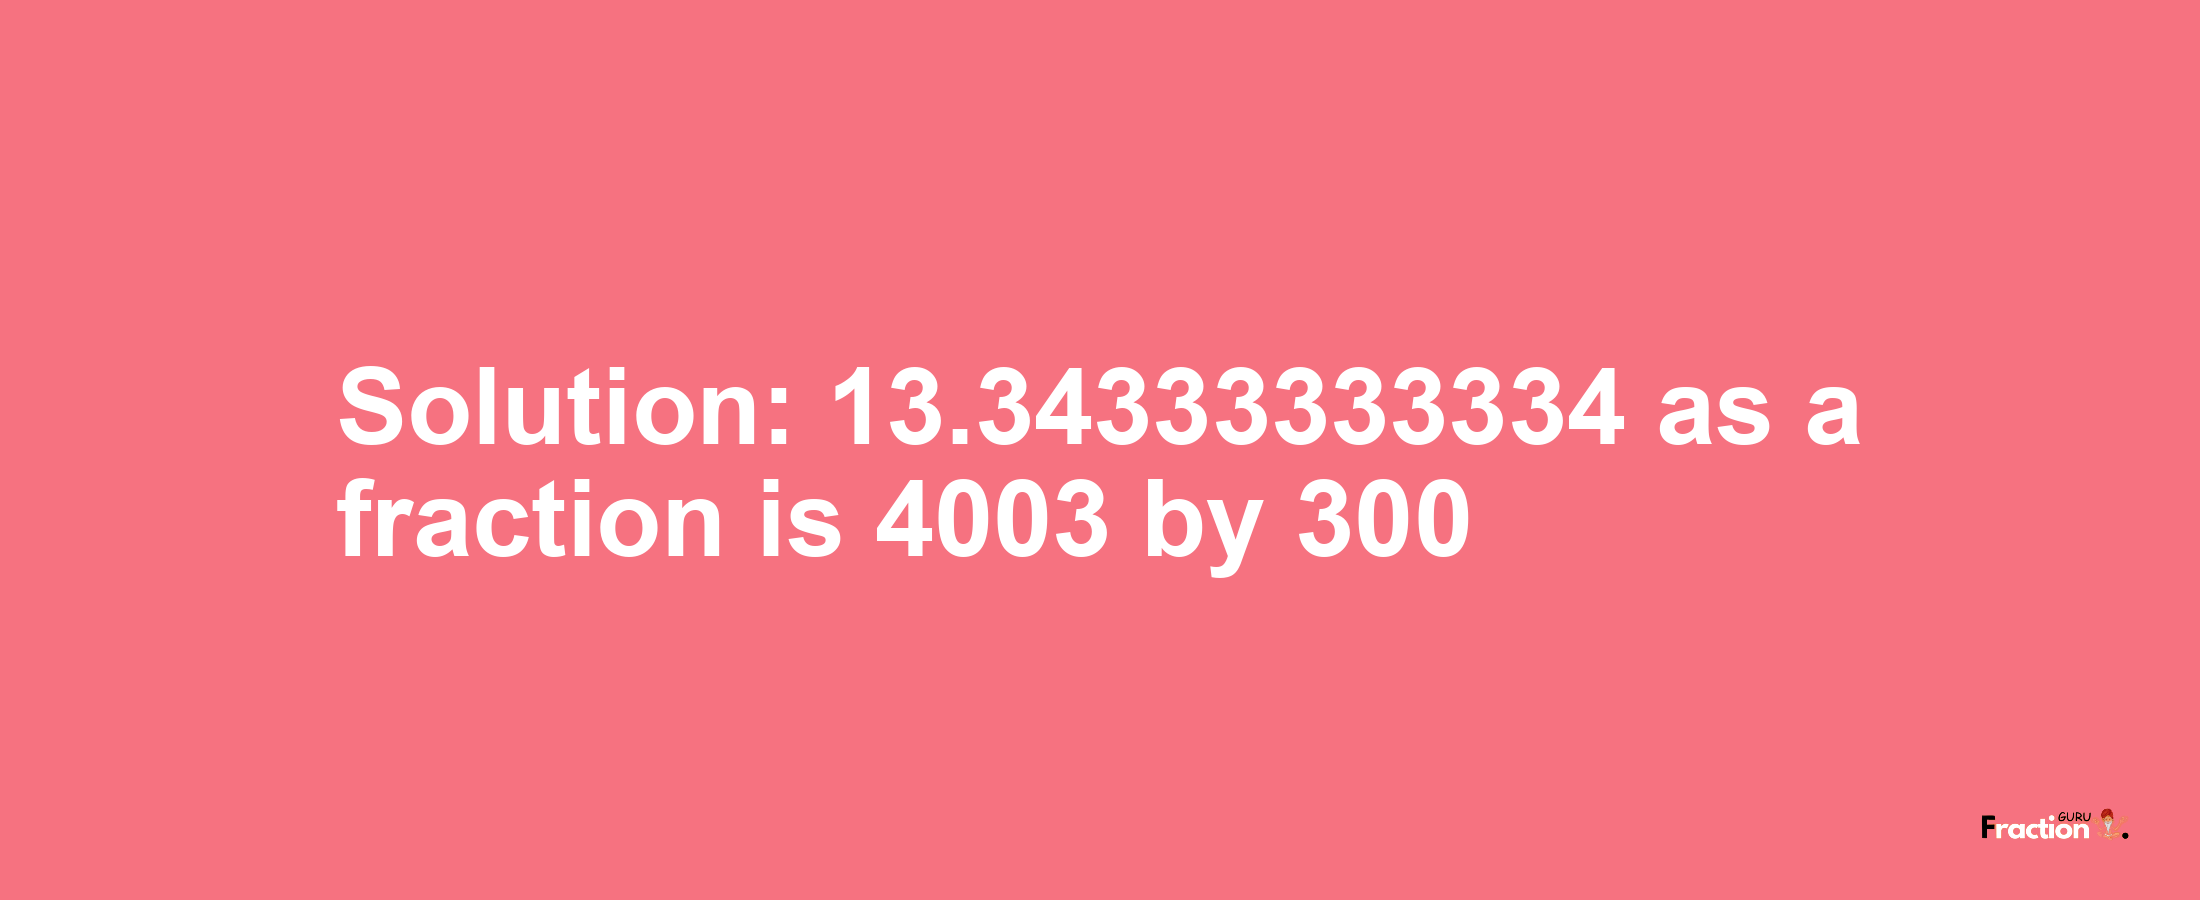 Solution:13.34333333334 as a fraction is 4003/300